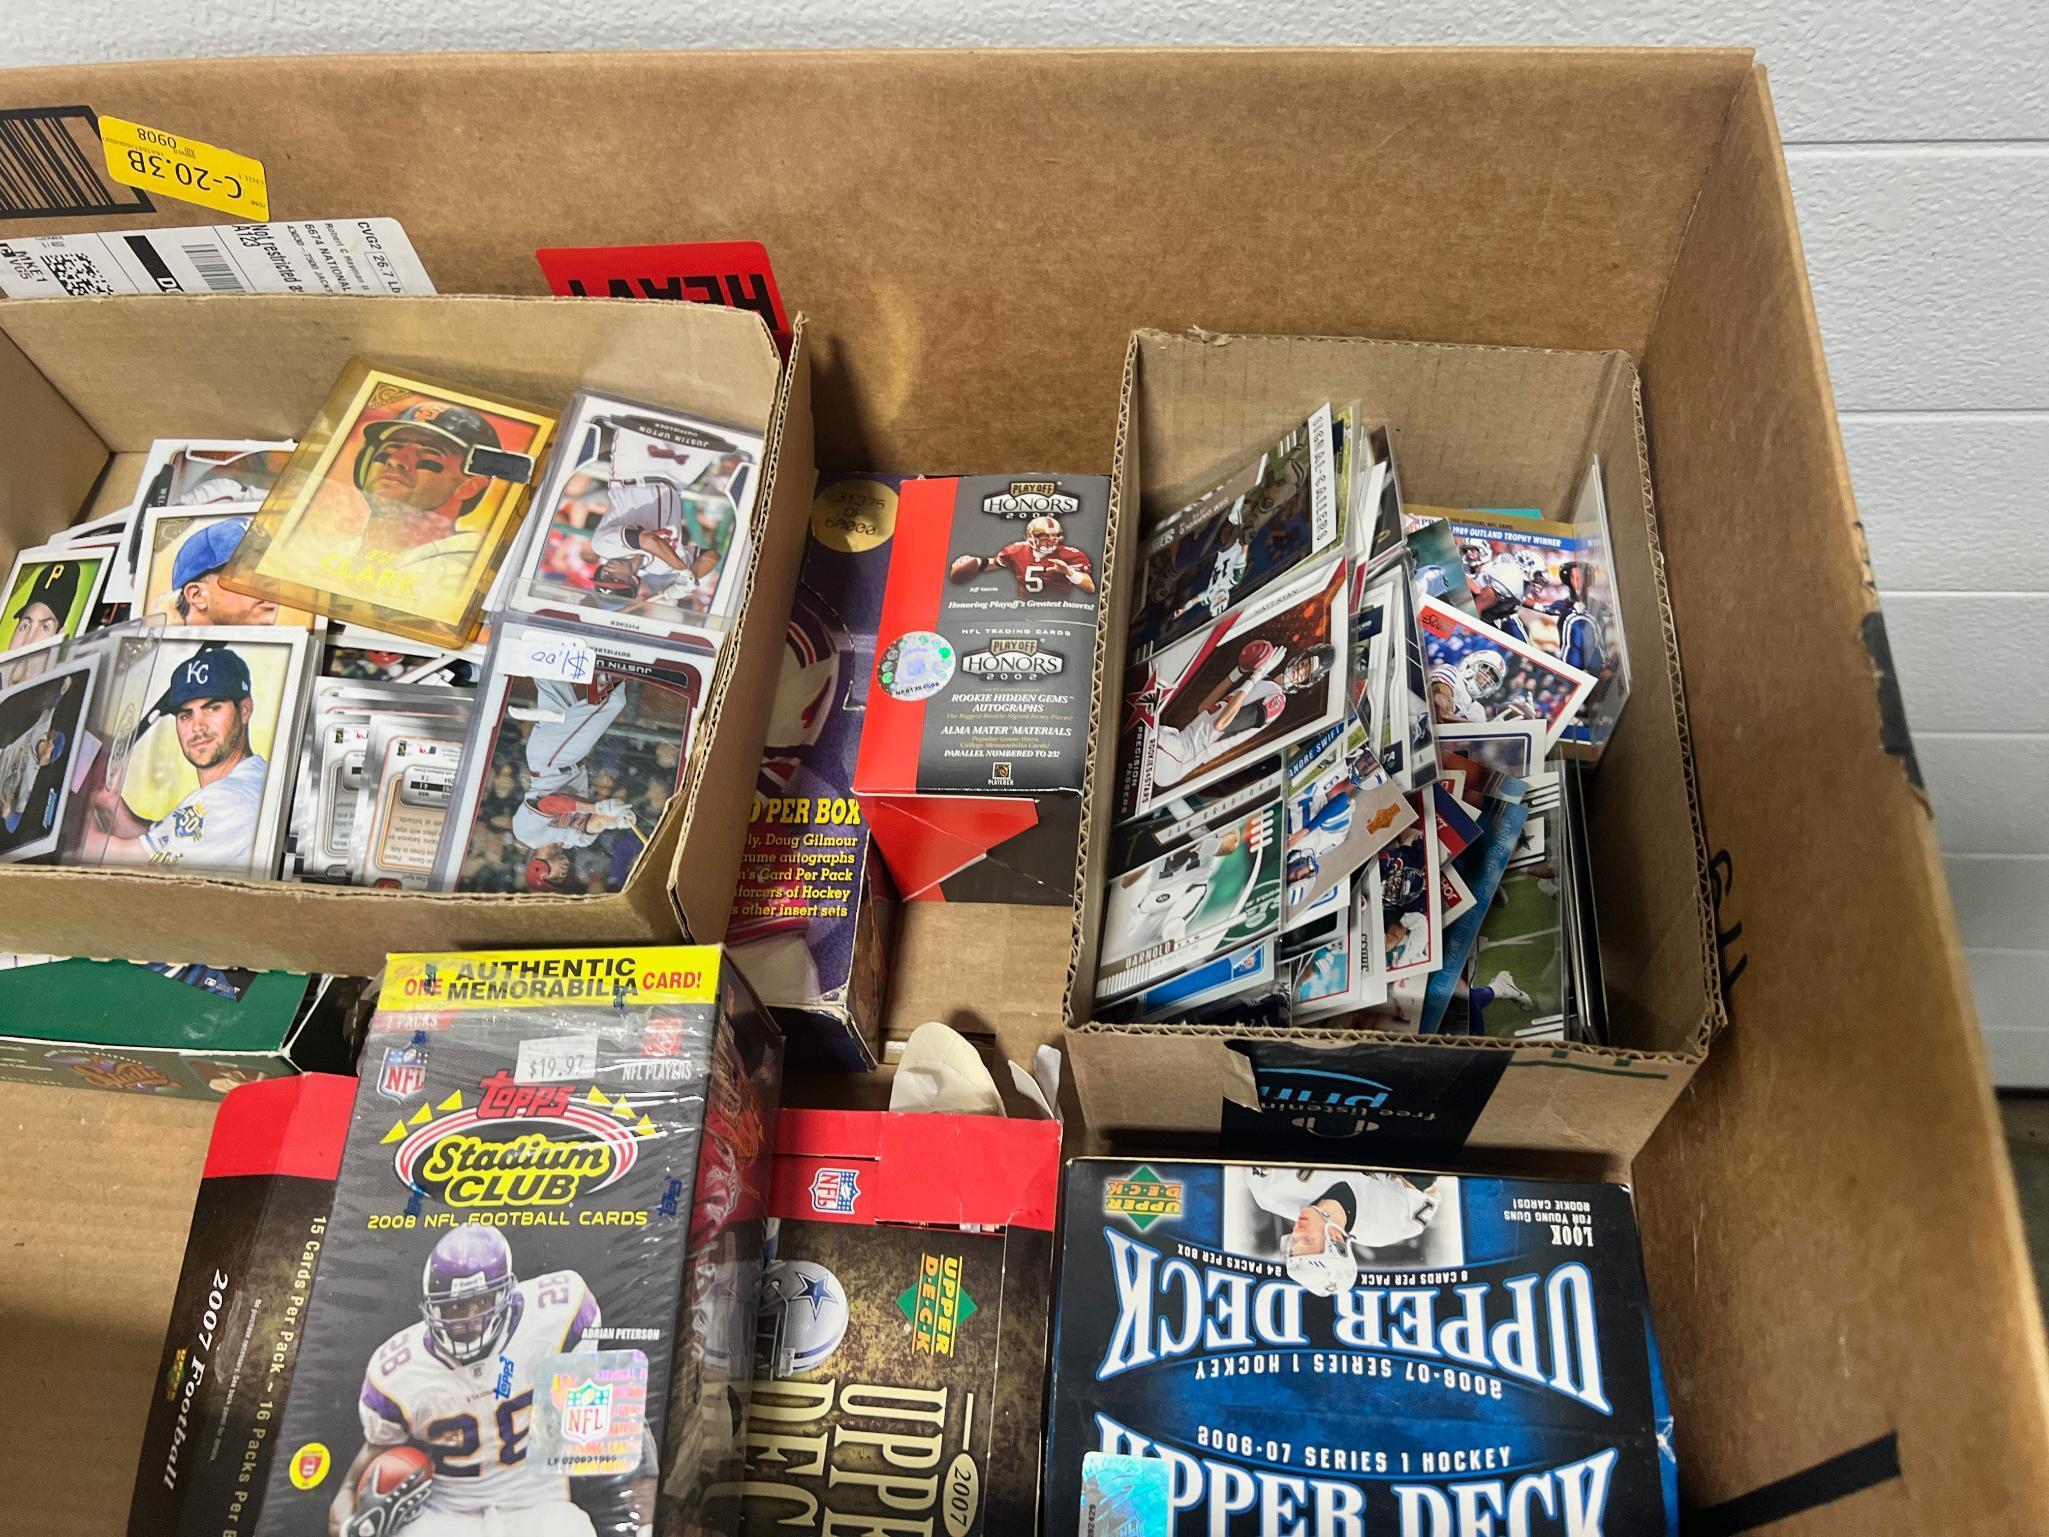 Football and Baseball Large box/ wax opened and stars in Toploaders